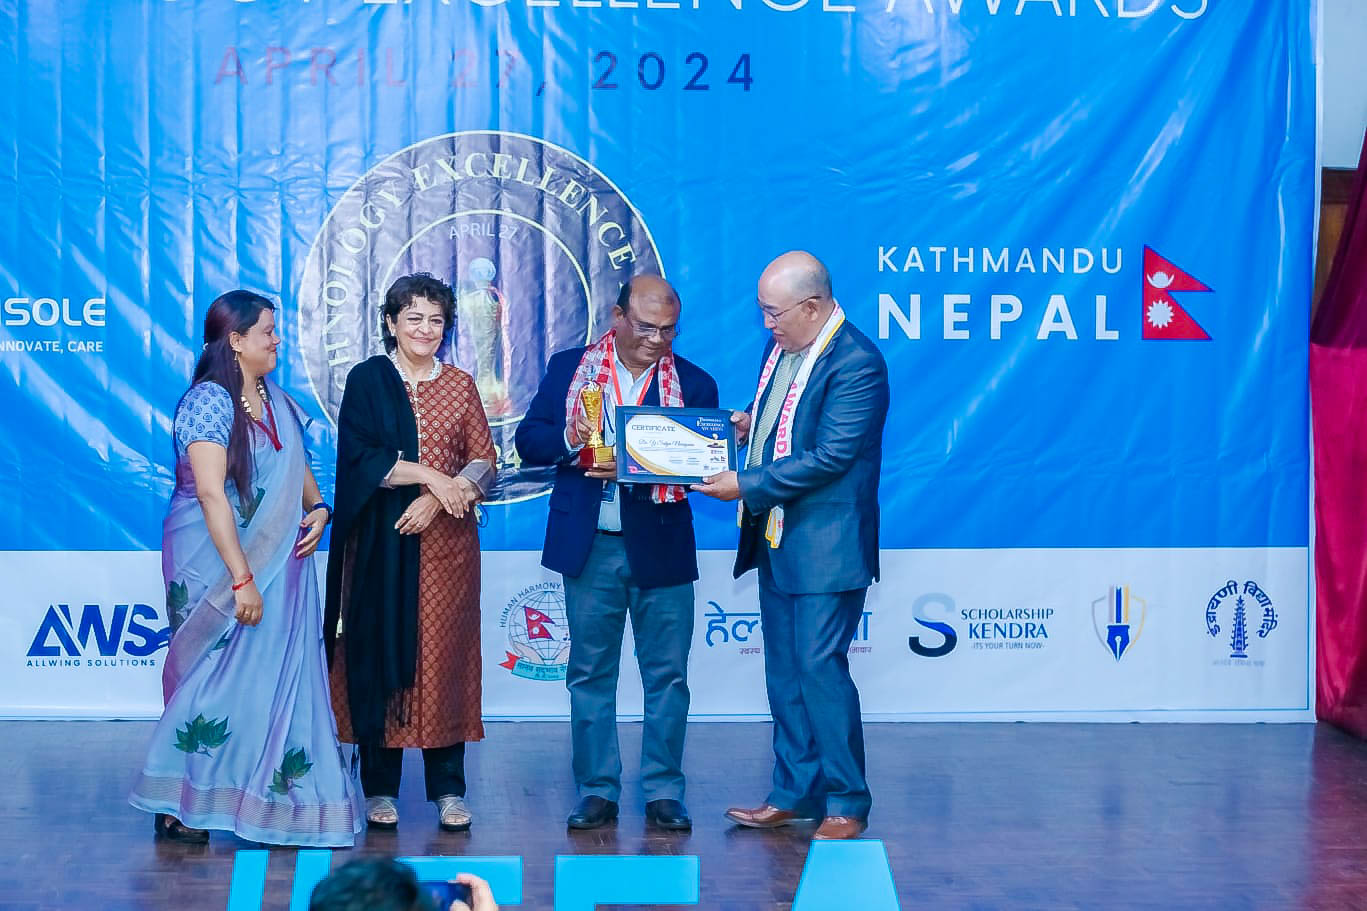 Dr Y Satya Narayana : Pioneering Tech Trailblazer Honored at the 2024 Technology Excellence Awards in Kathmandu, Nepal